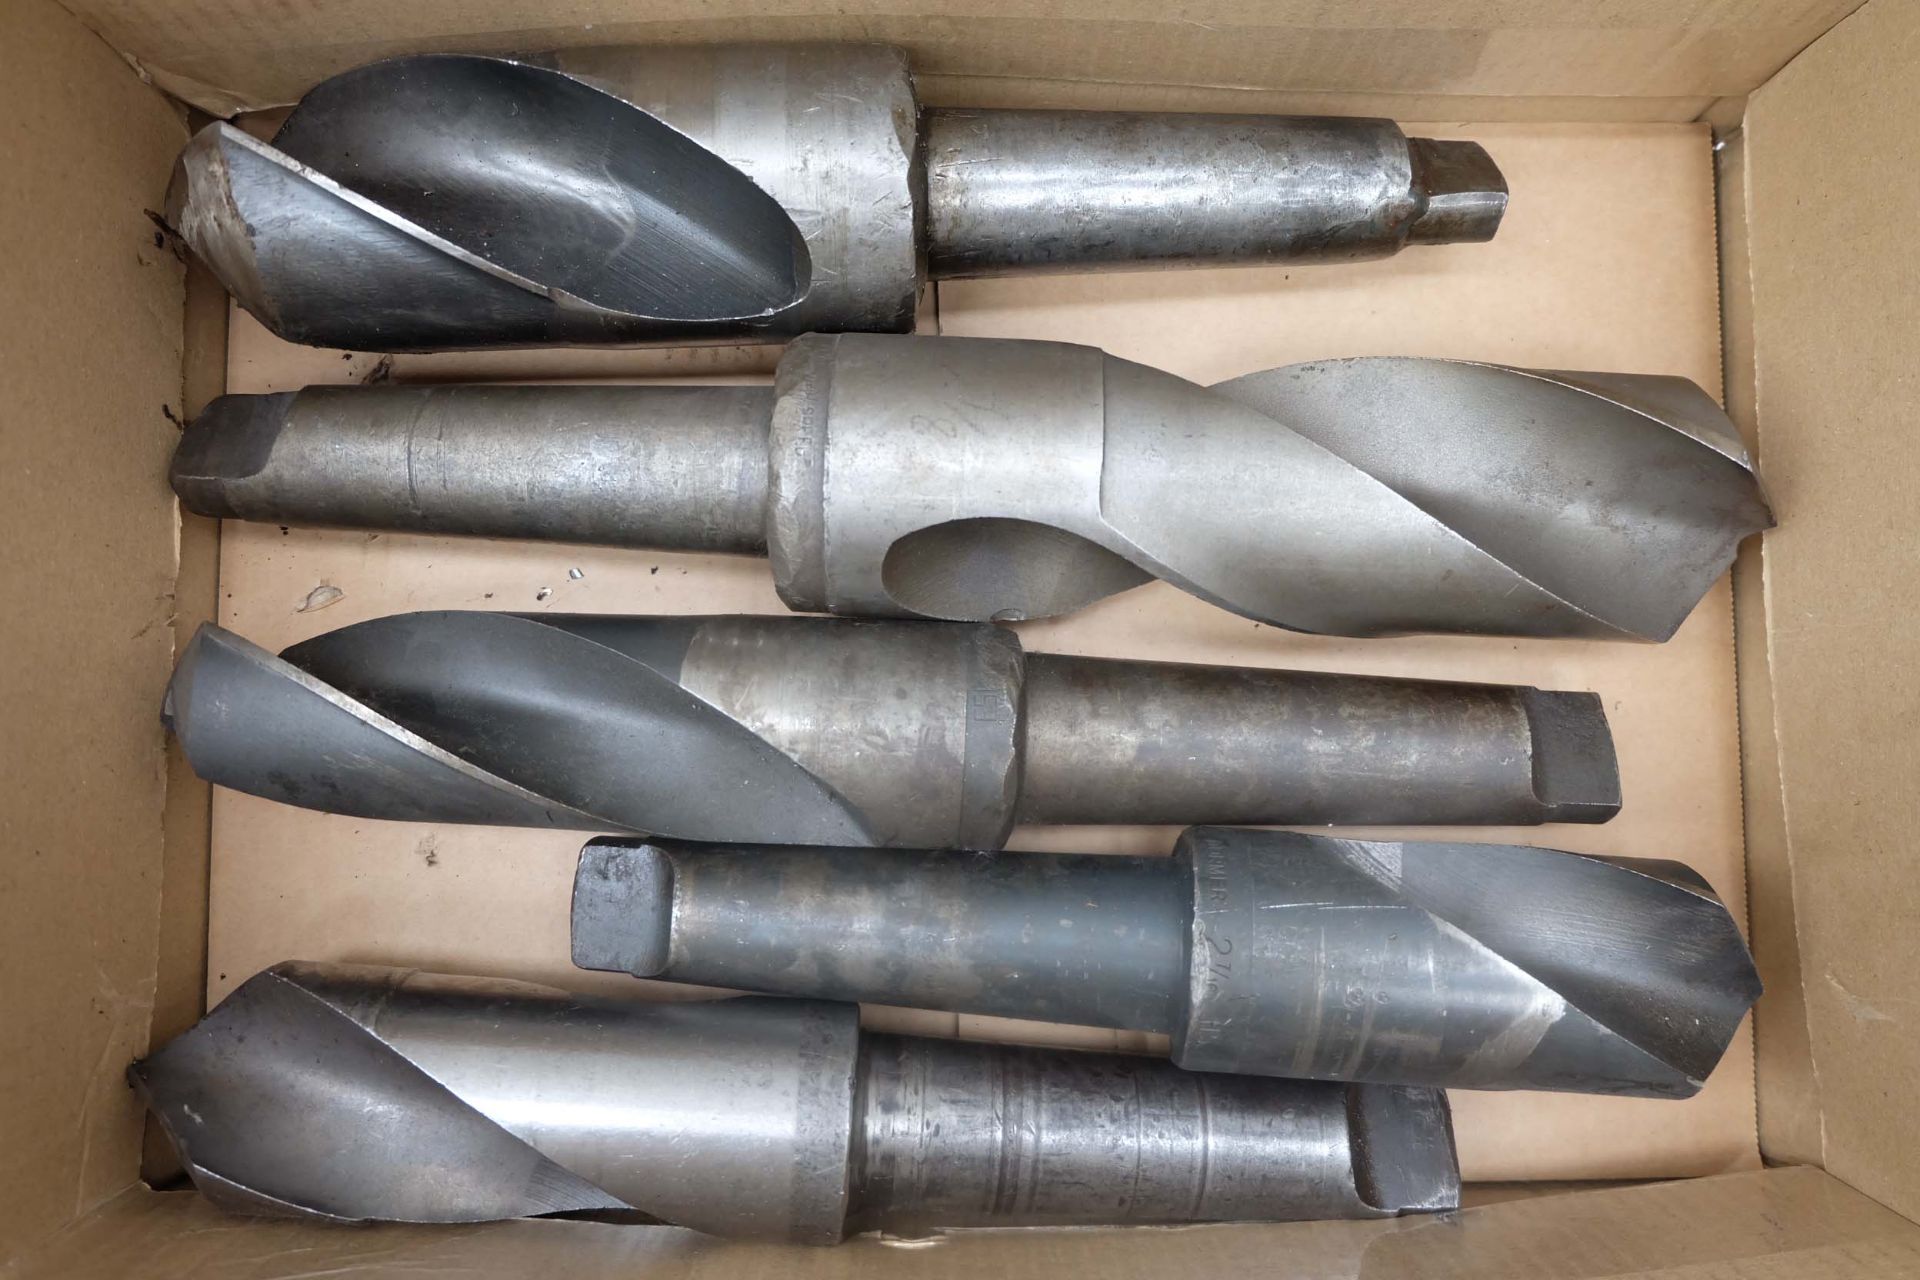 5 x Large Imperial Twist Drills. Sizes upto 2 7/8". All No. 5 Morse Taper. - Image 2 of 4